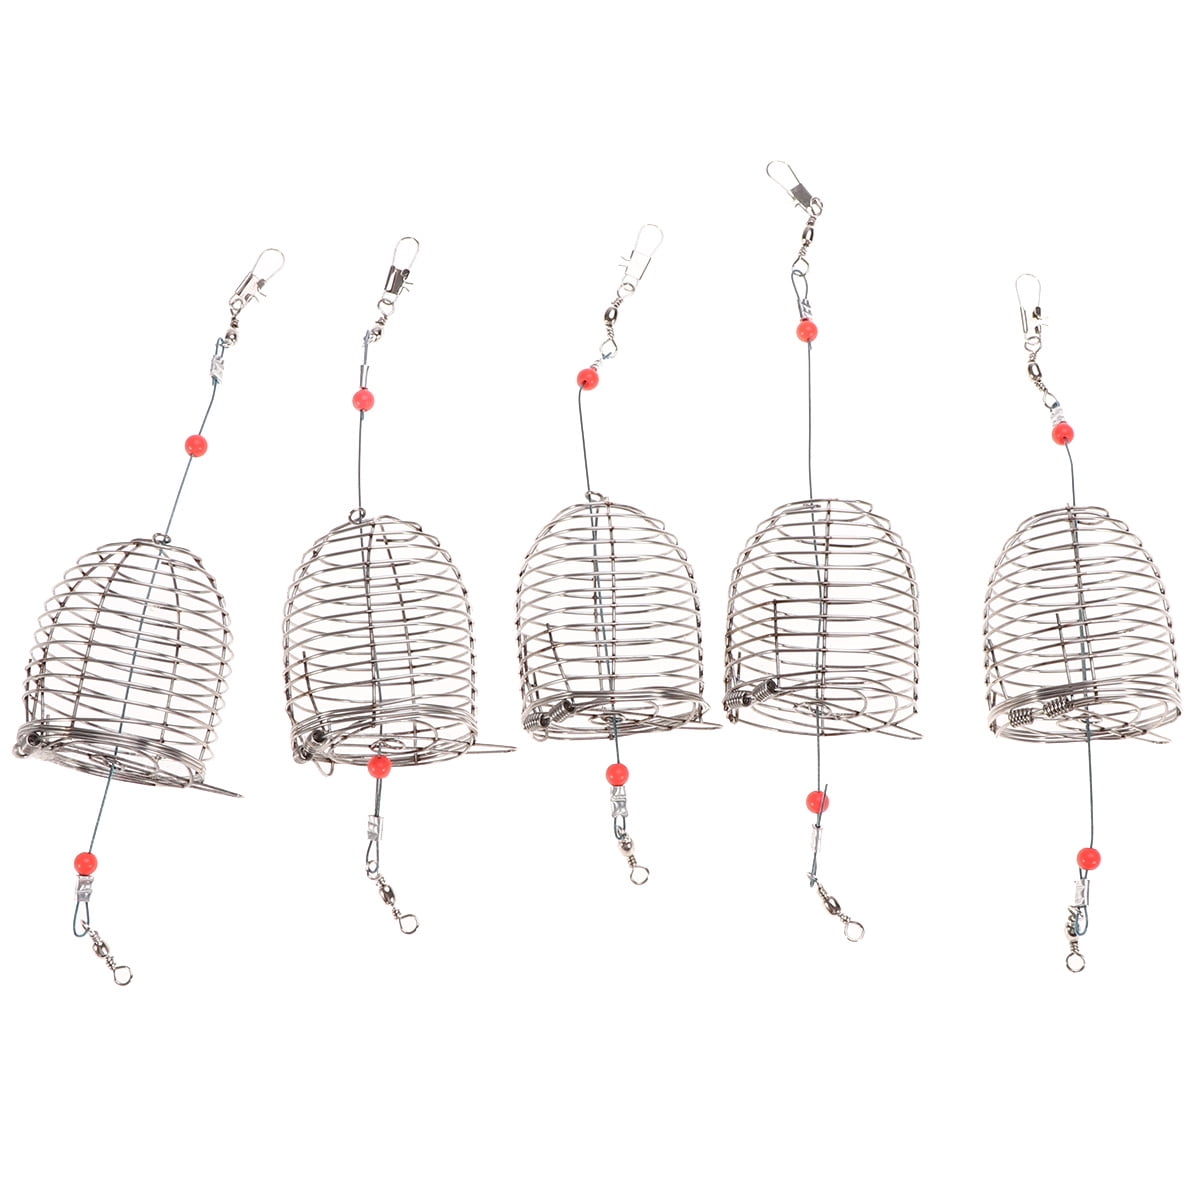 Frcolor 8pcs Stainless Steel Fishing Bait Cage Lure Cage Bait Fishing Trap  Basket Feeder Holder Fishing Tackle(Red, Large) 